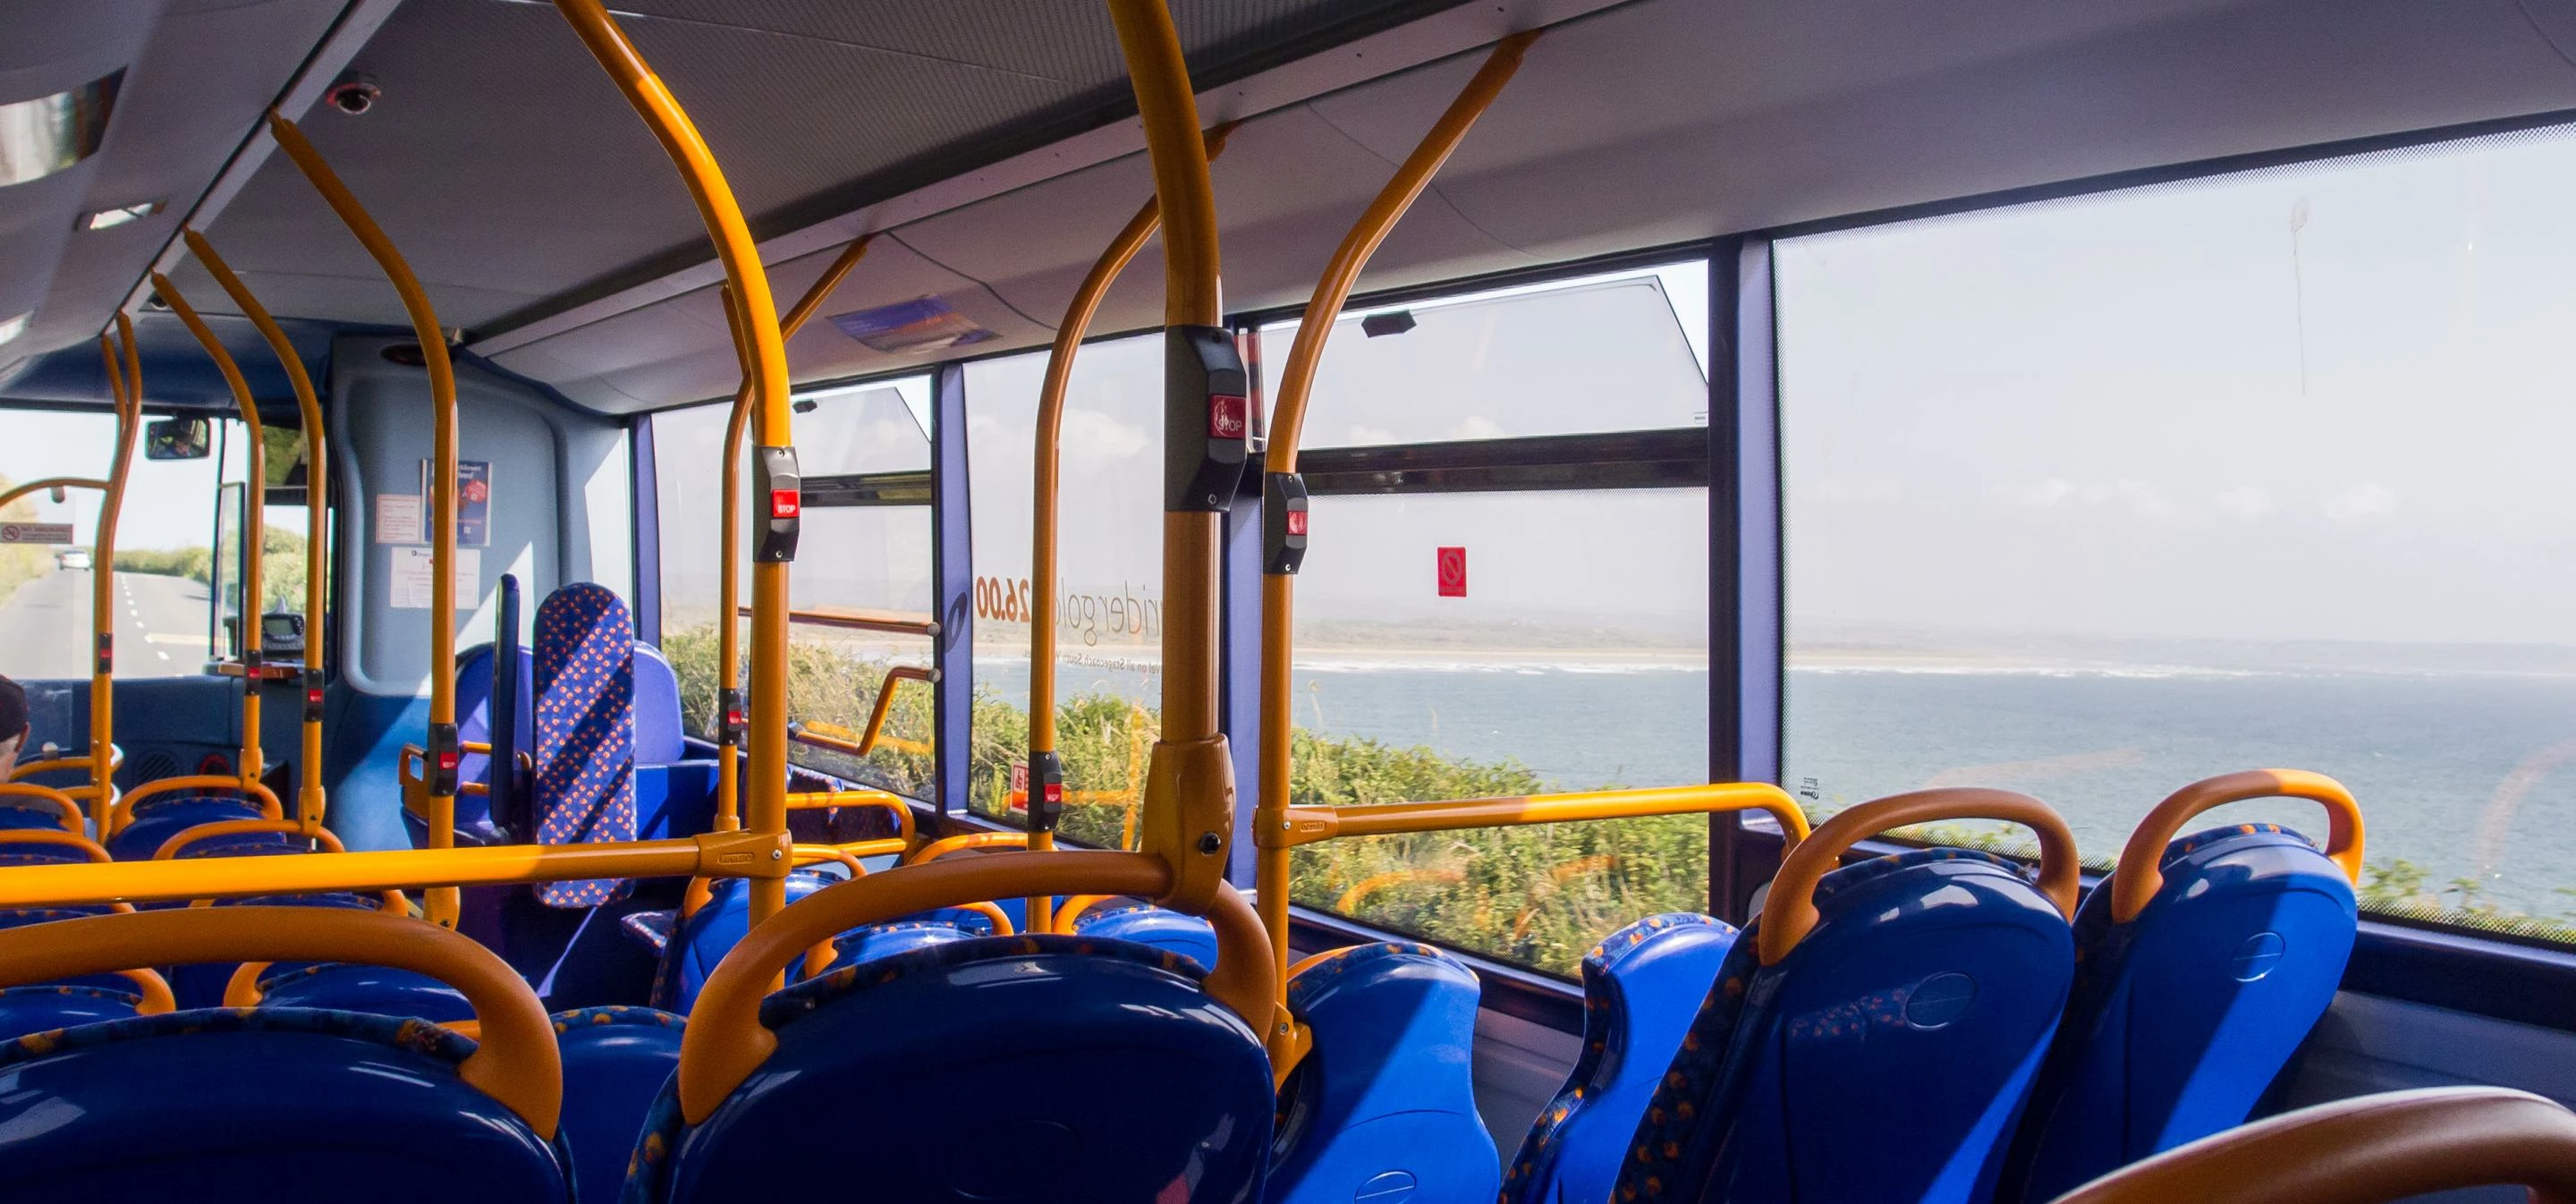 Stagecoach 25260 on route 308 at Croyde Bay